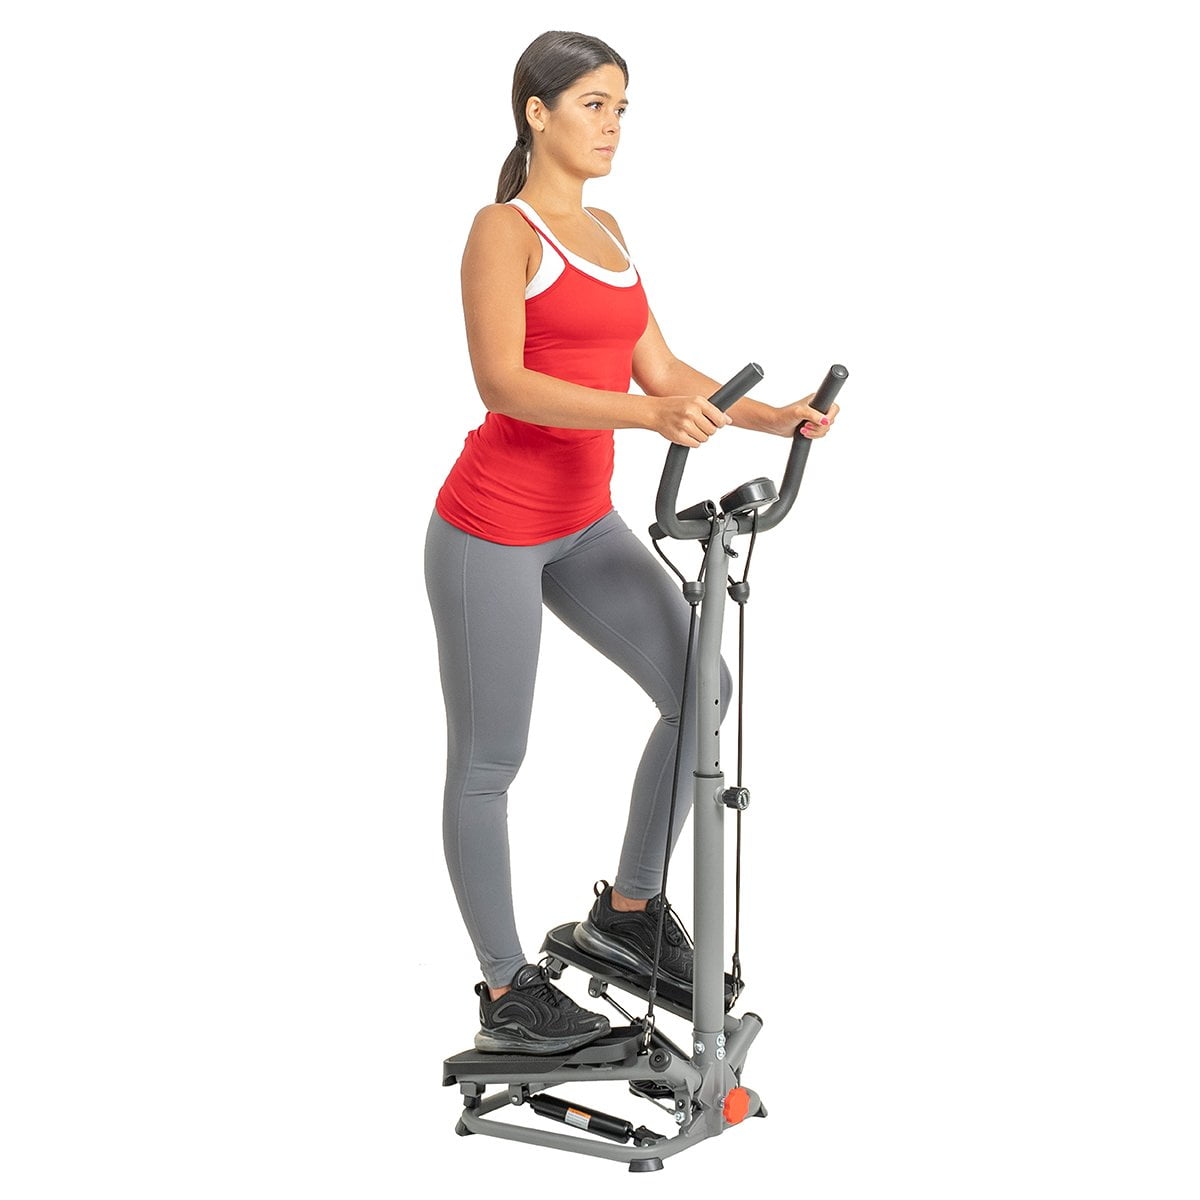 Stair Stepper Exercise Equipment Fitness Machine W/Handle Bar Bands &LCD Monitor 